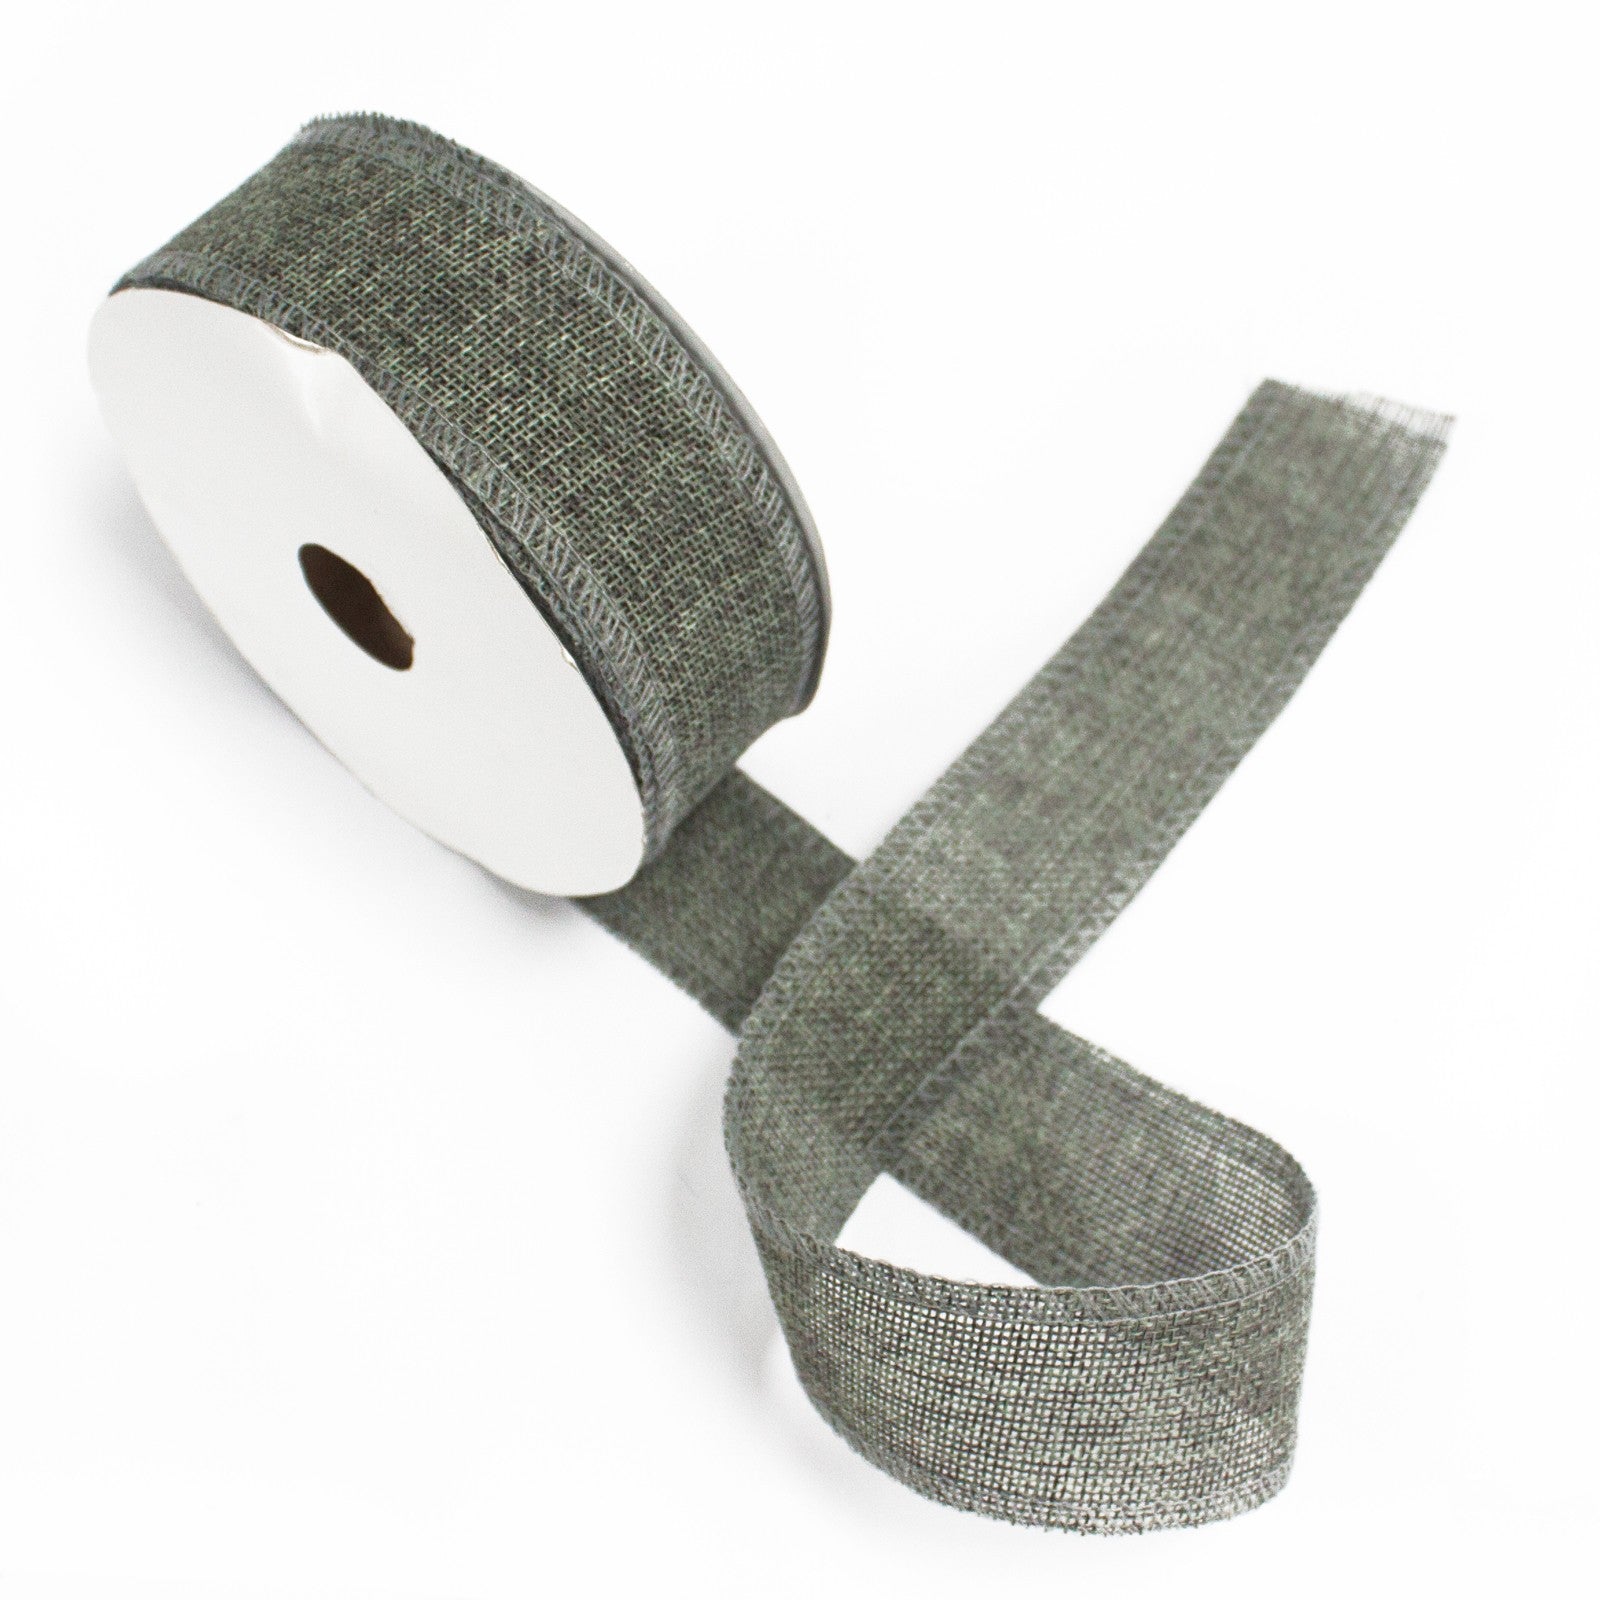 View Natural Texture Ribbon 38mm x 20m Charcoal information